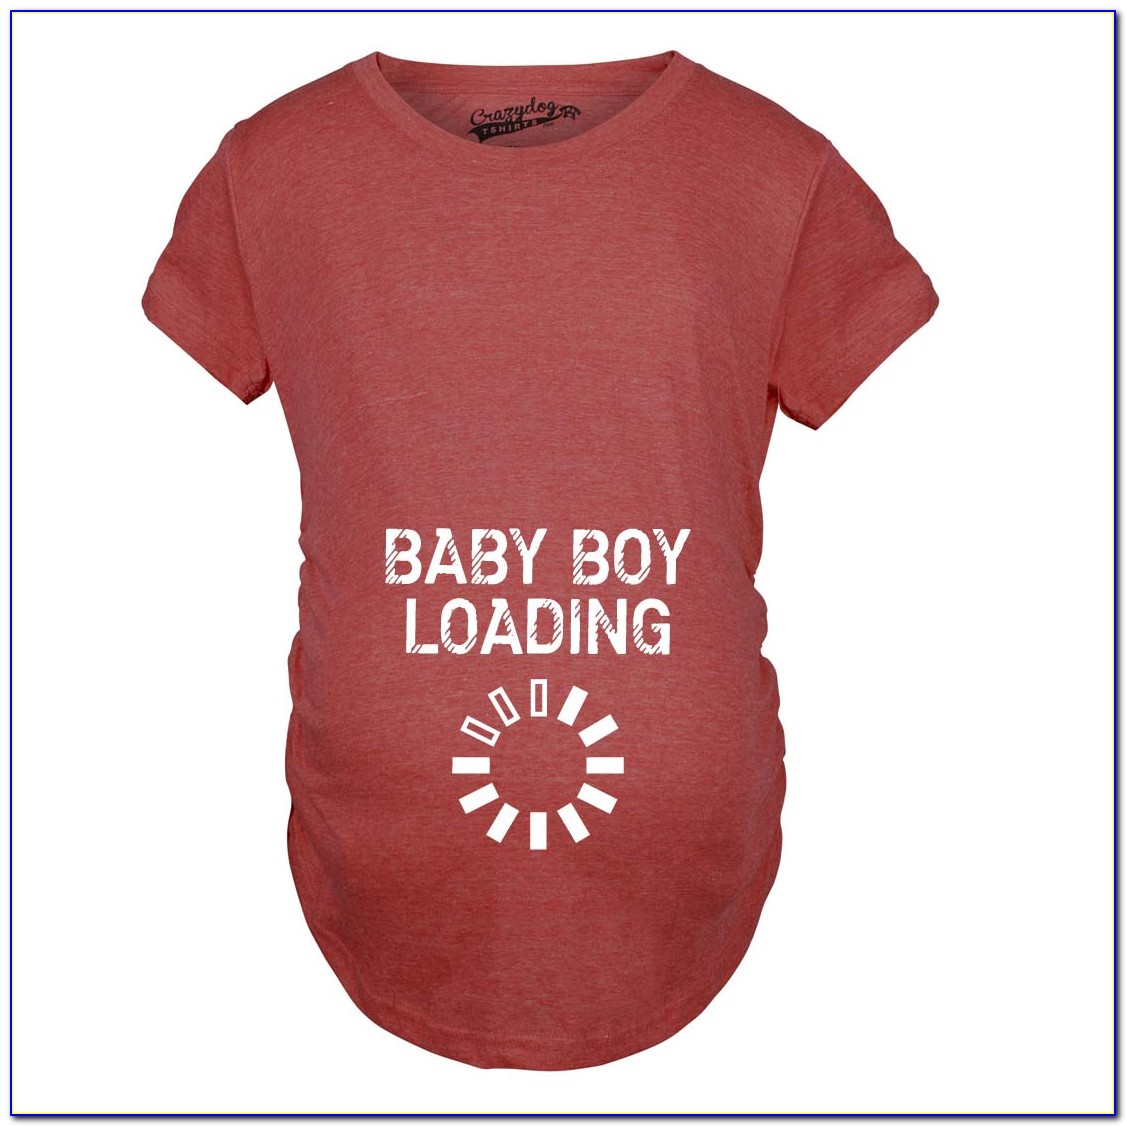 Baby Announcement Shirts For Toddlers